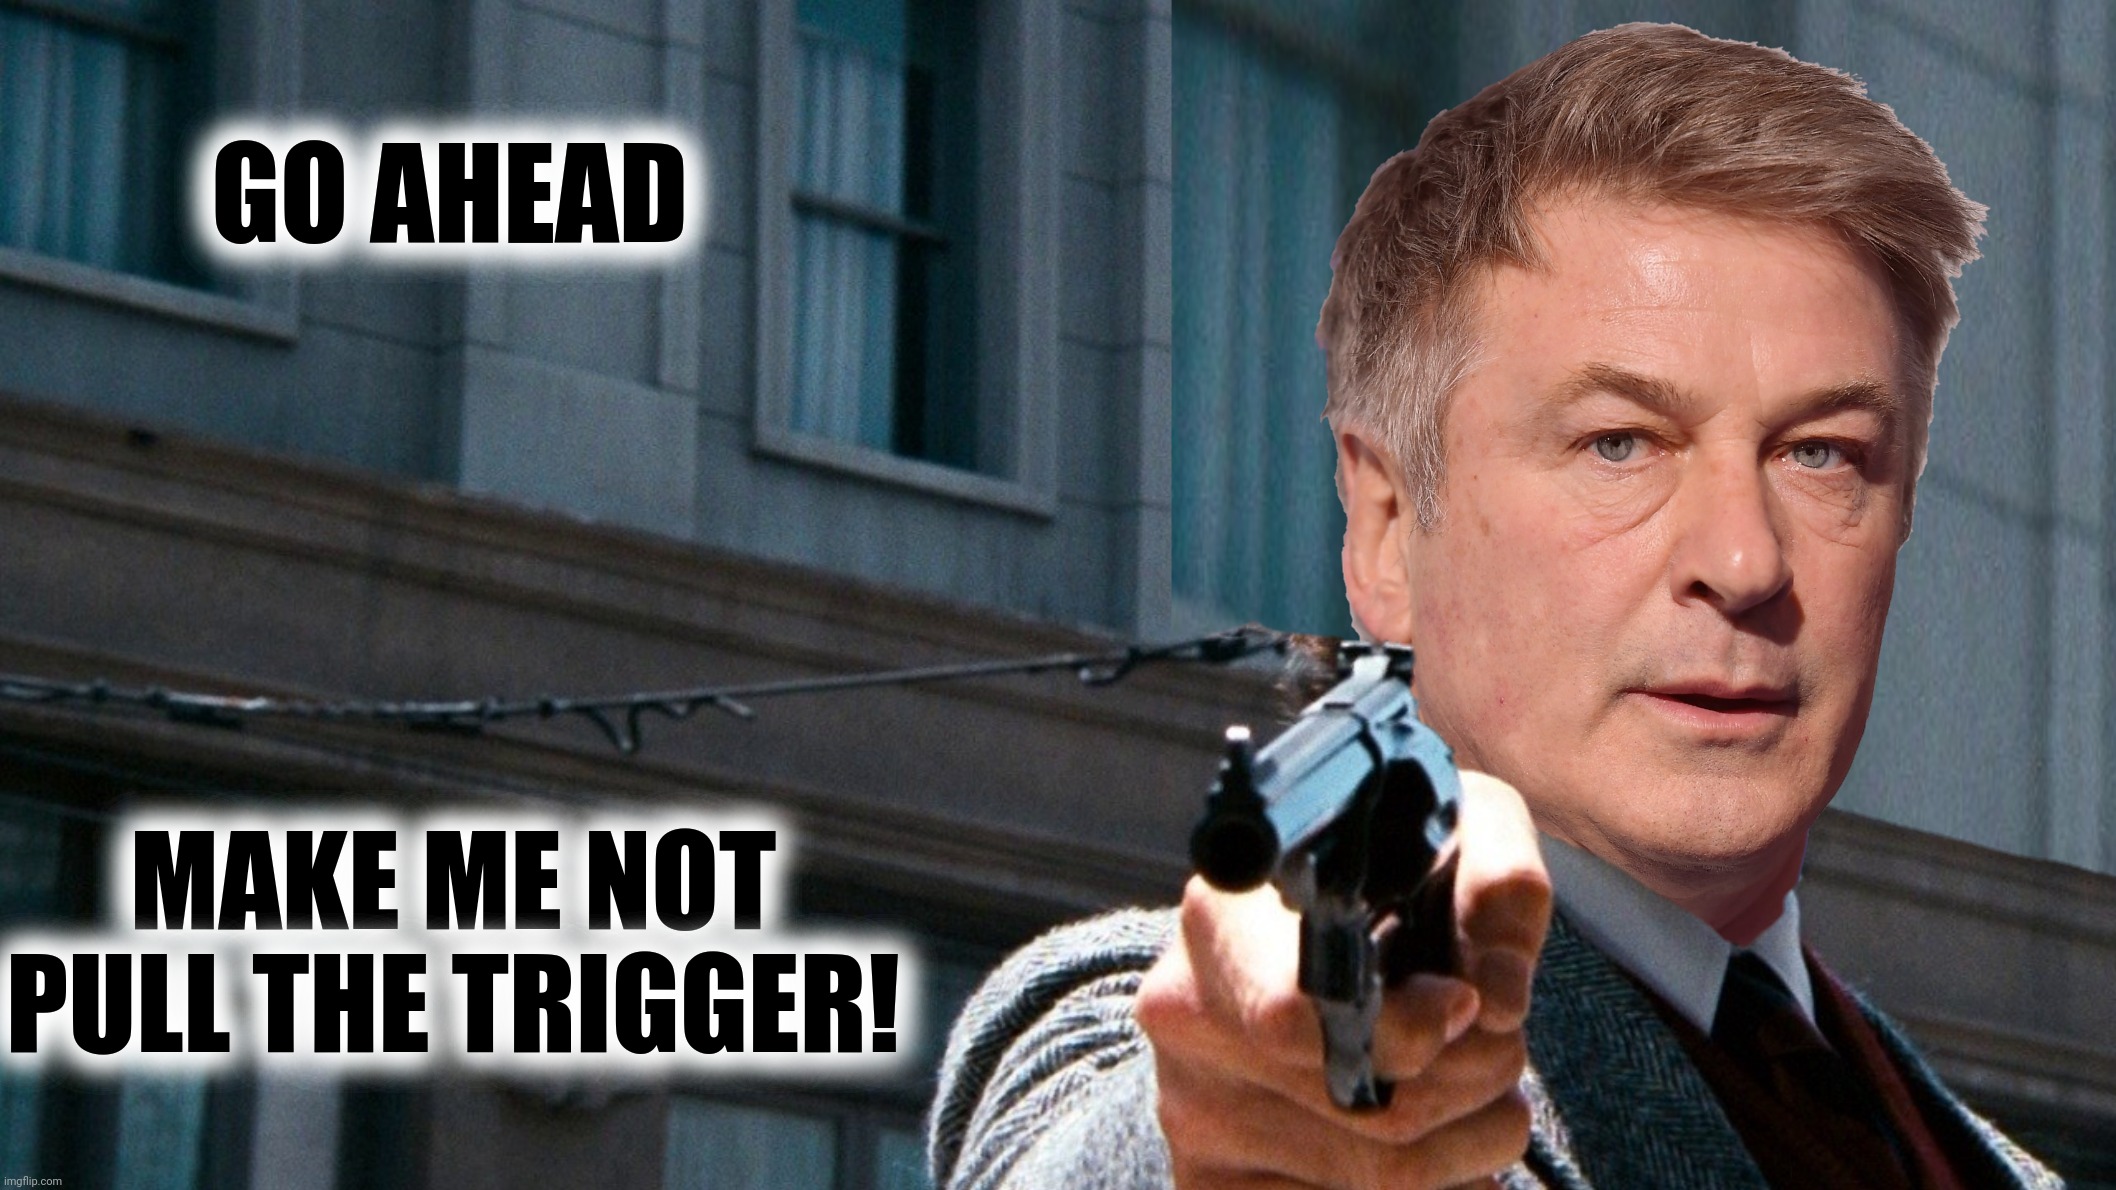 GO AHEAD MAKE ME NOT PULL THE TRIGGER! | made w/ Imgflip meme maker